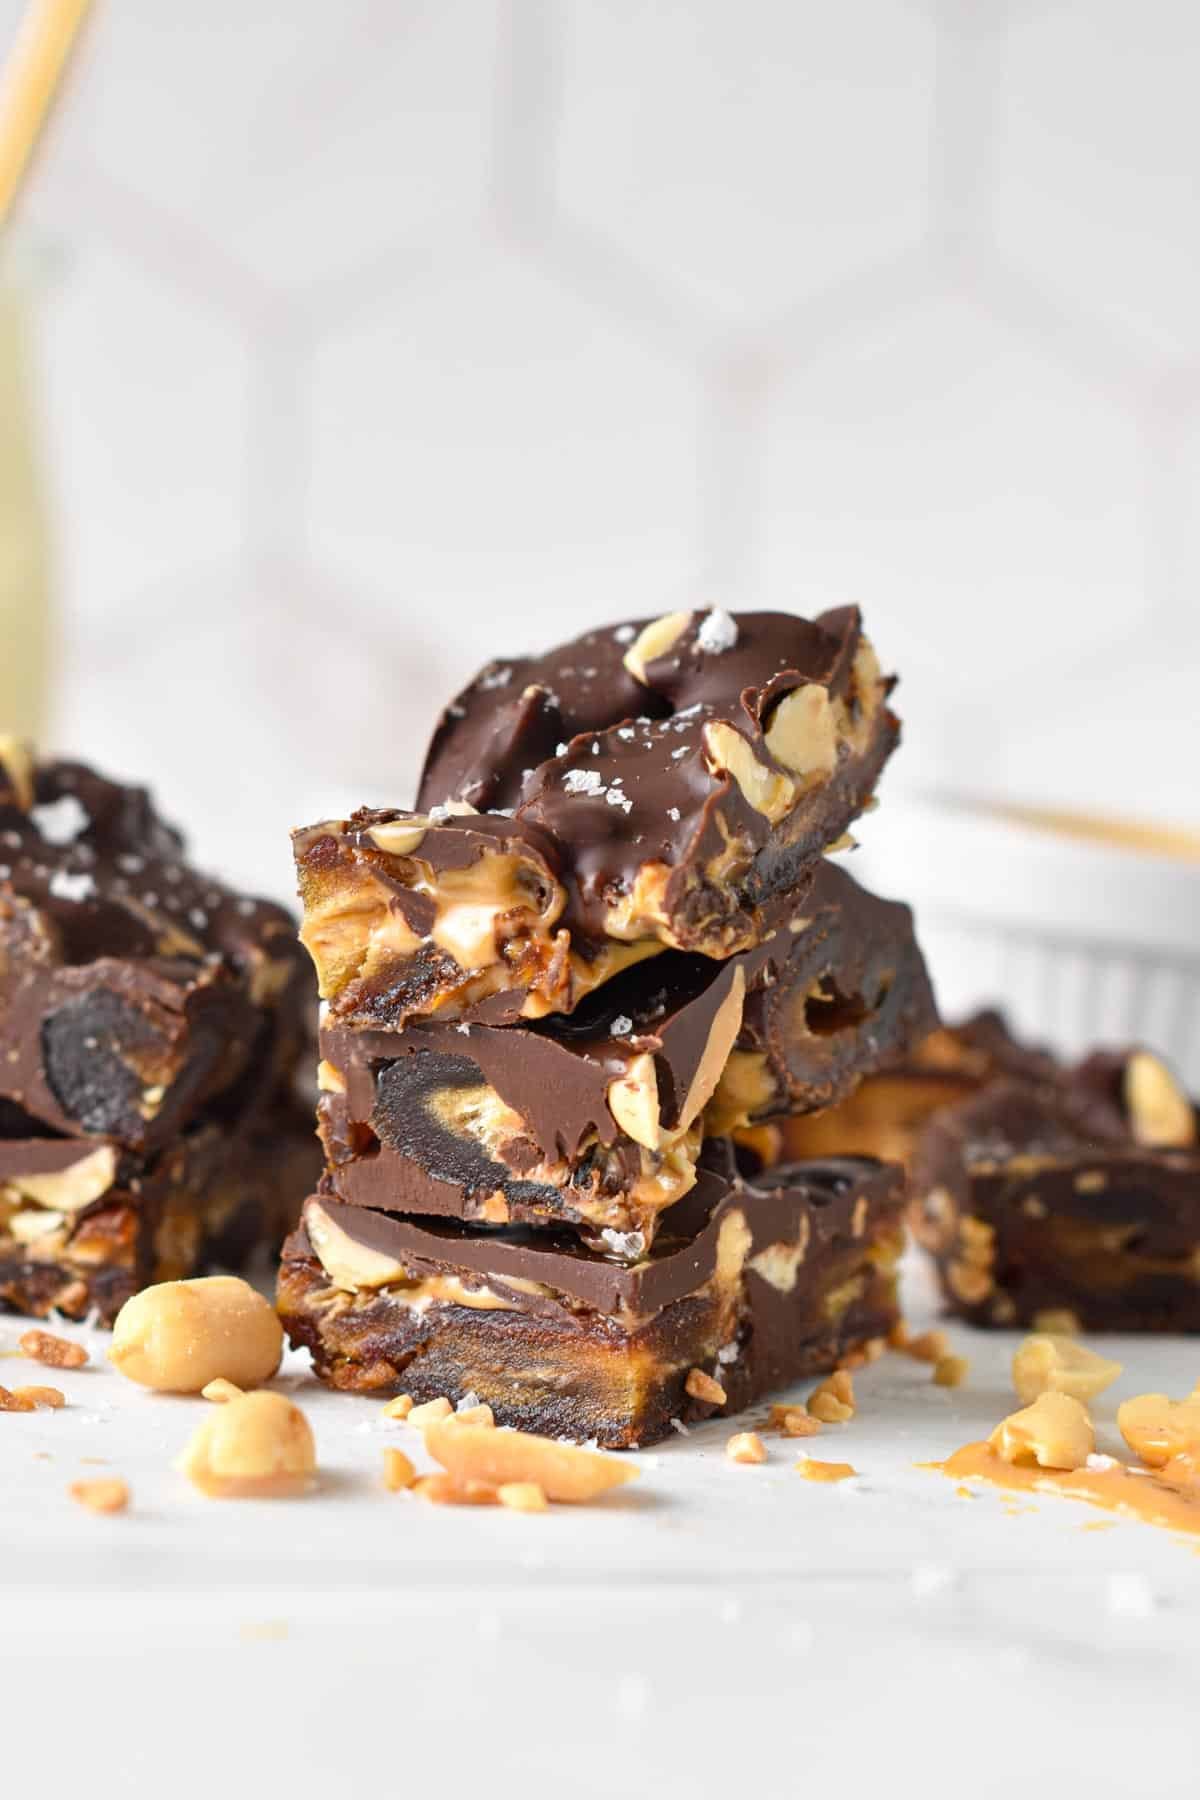 Pieces of date bark made with Medjool dates, peanuts, peanut butter and melted dark chocolate.